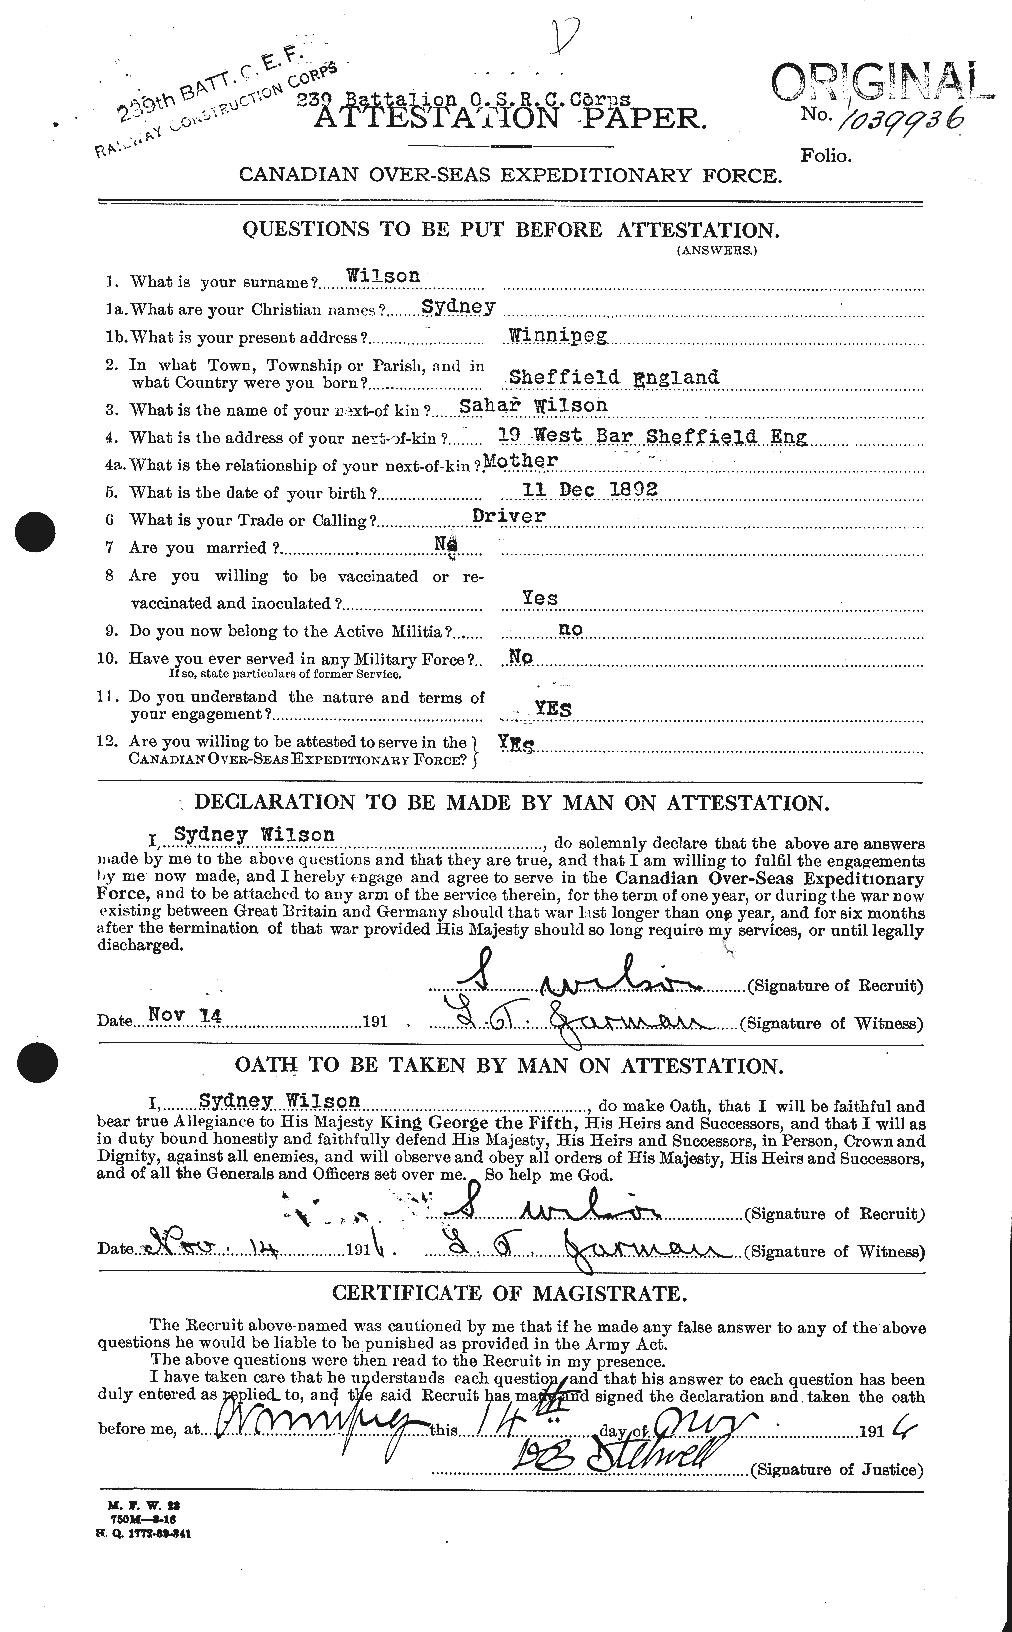 Personnel Records of the First World War - CEF 681159a